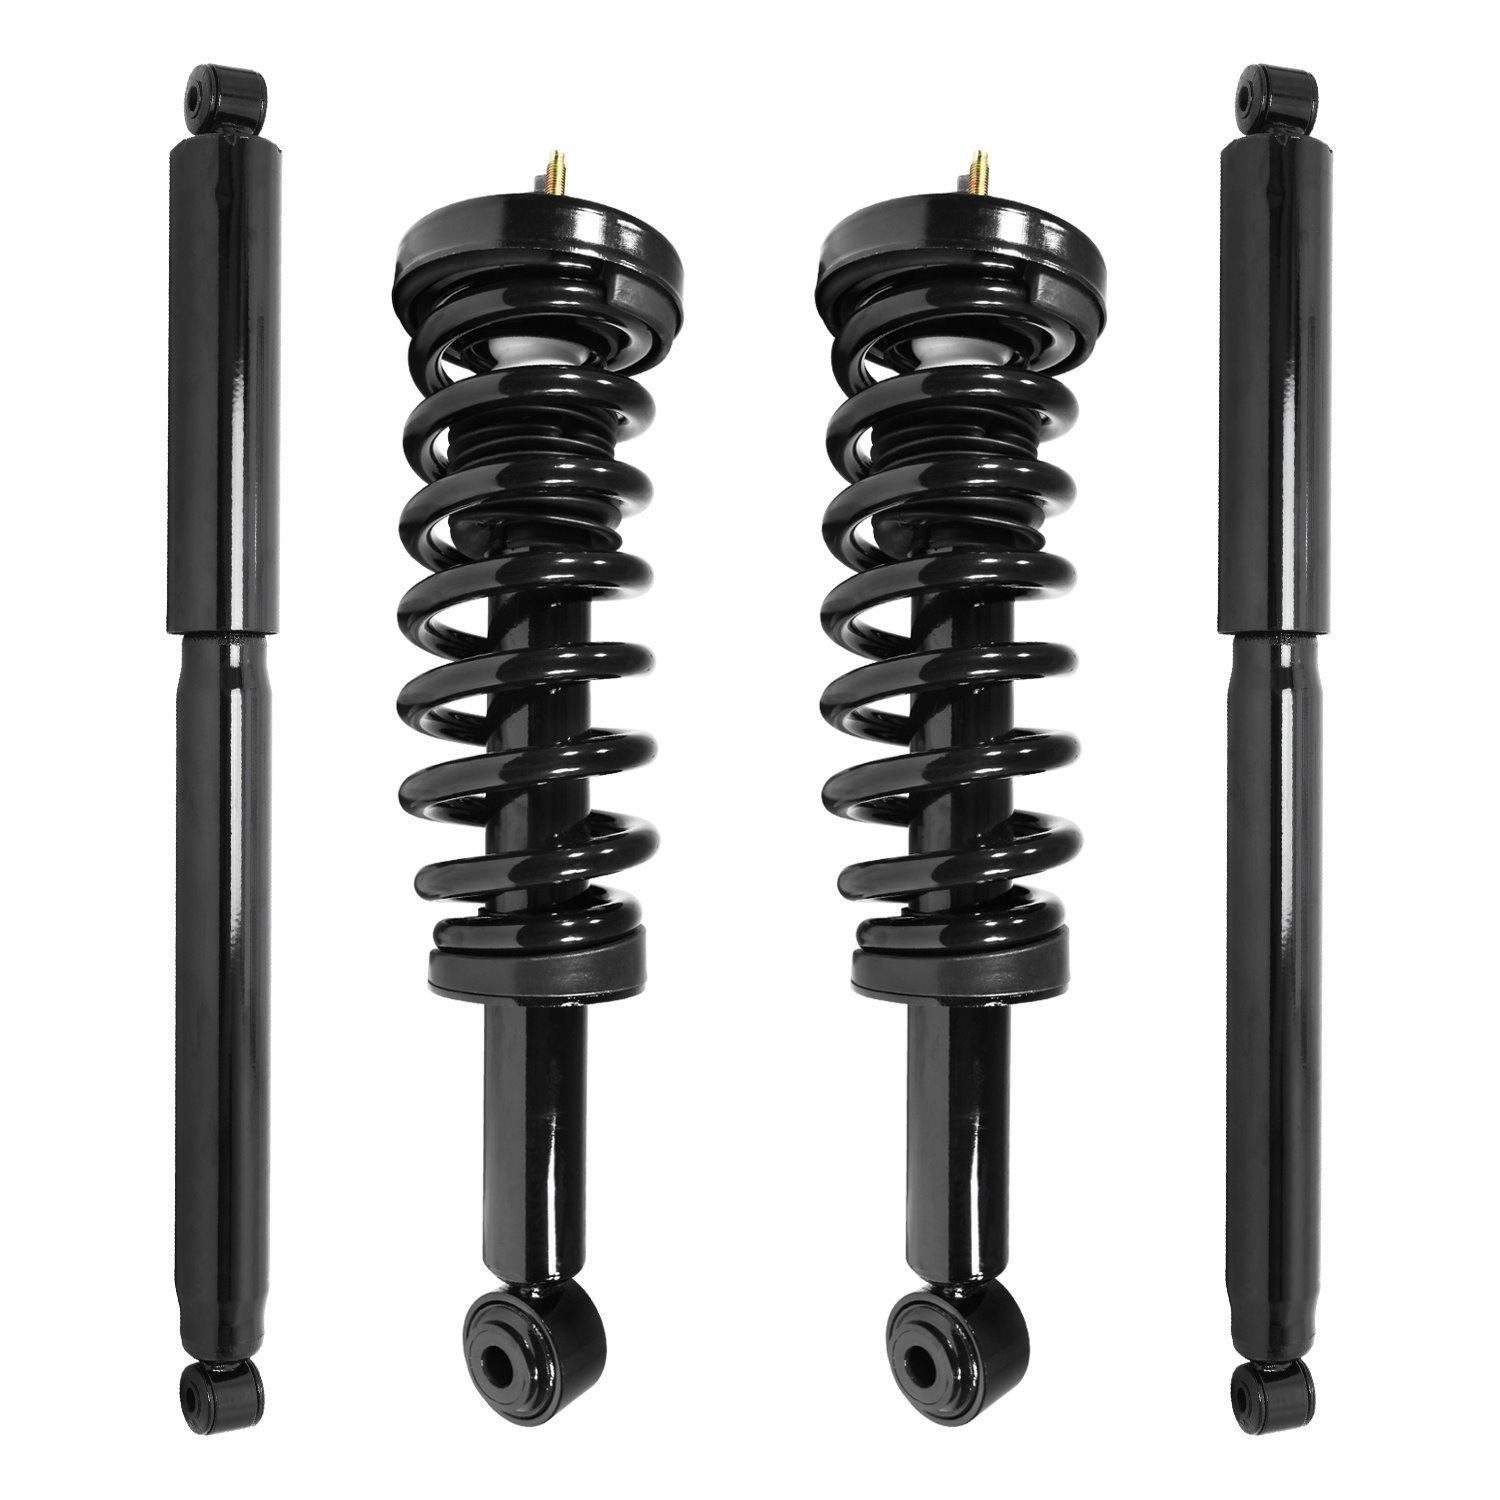 4-11306-252600-001 Front & Rear Suspension Strut & Coil Spring Assembly Fits Select Ford F-150